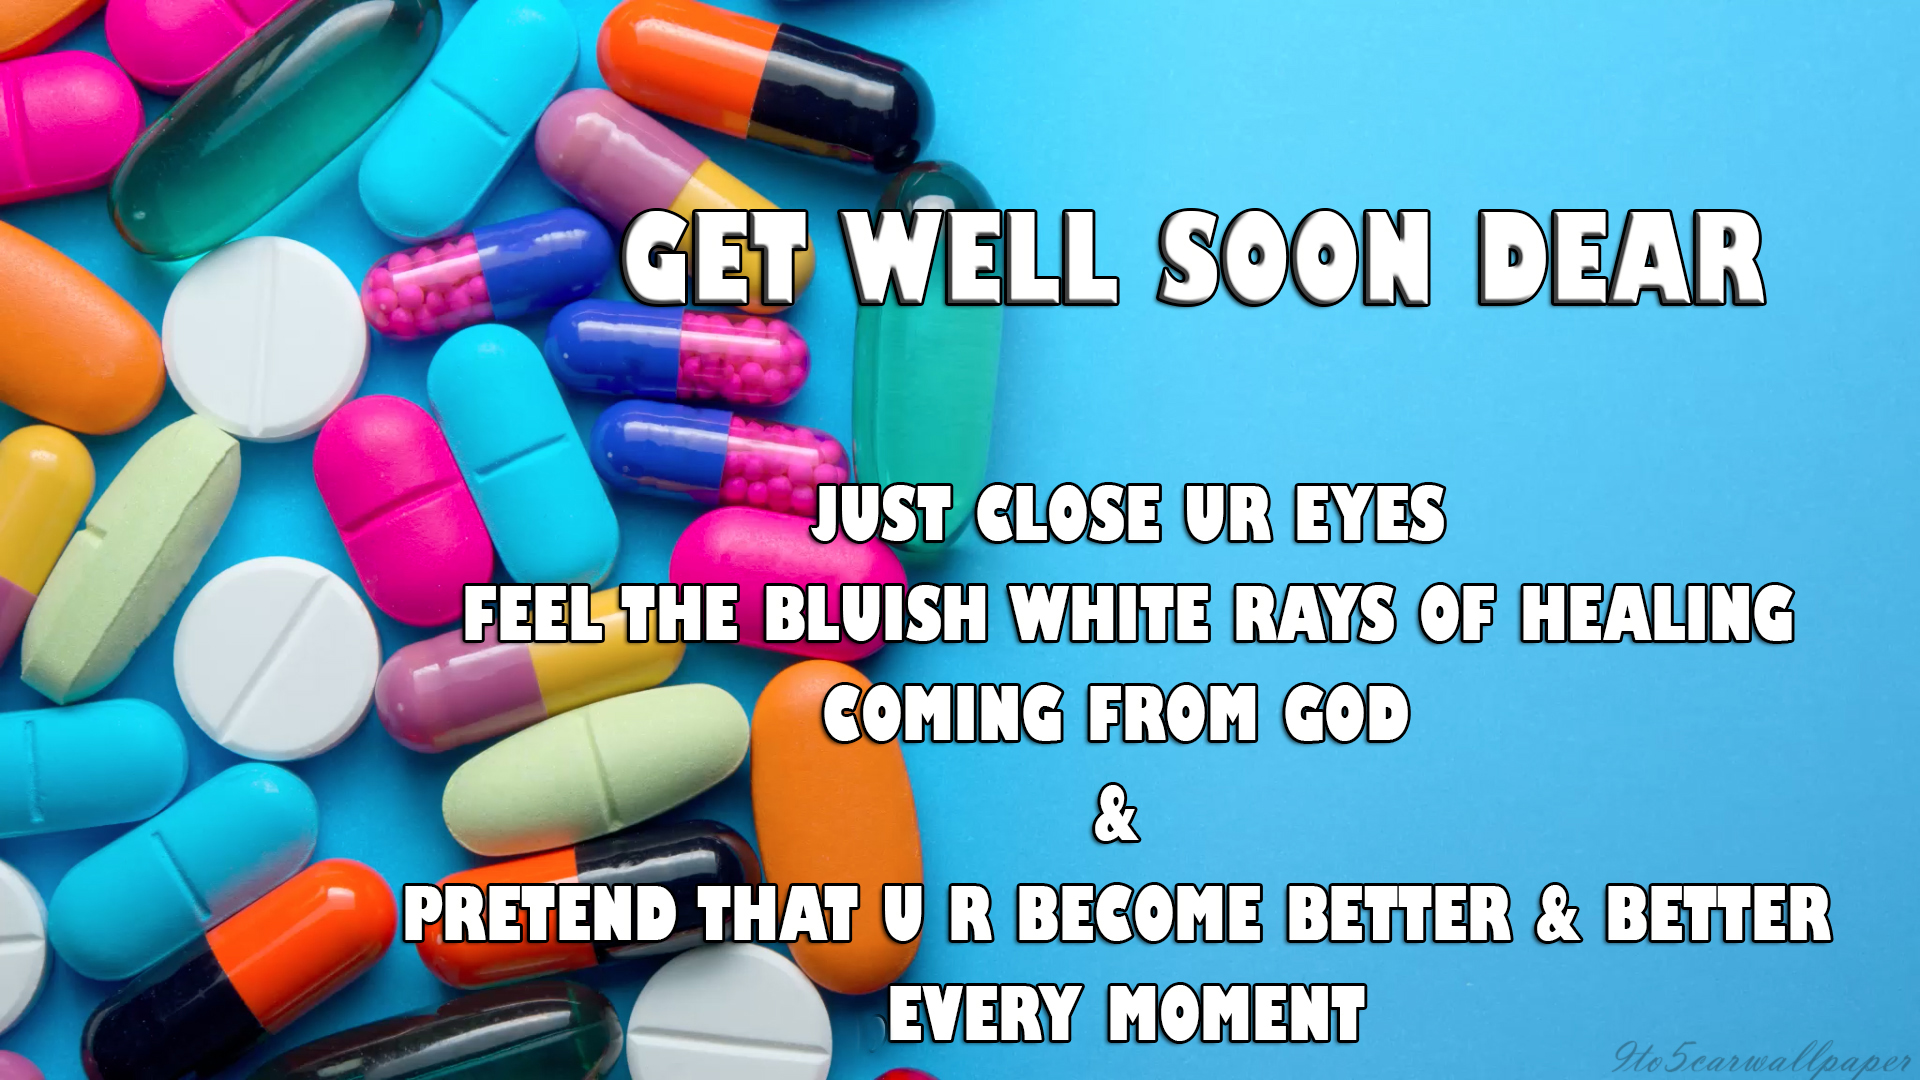 get-well-soon-dear-wishes-quotes-images-2018